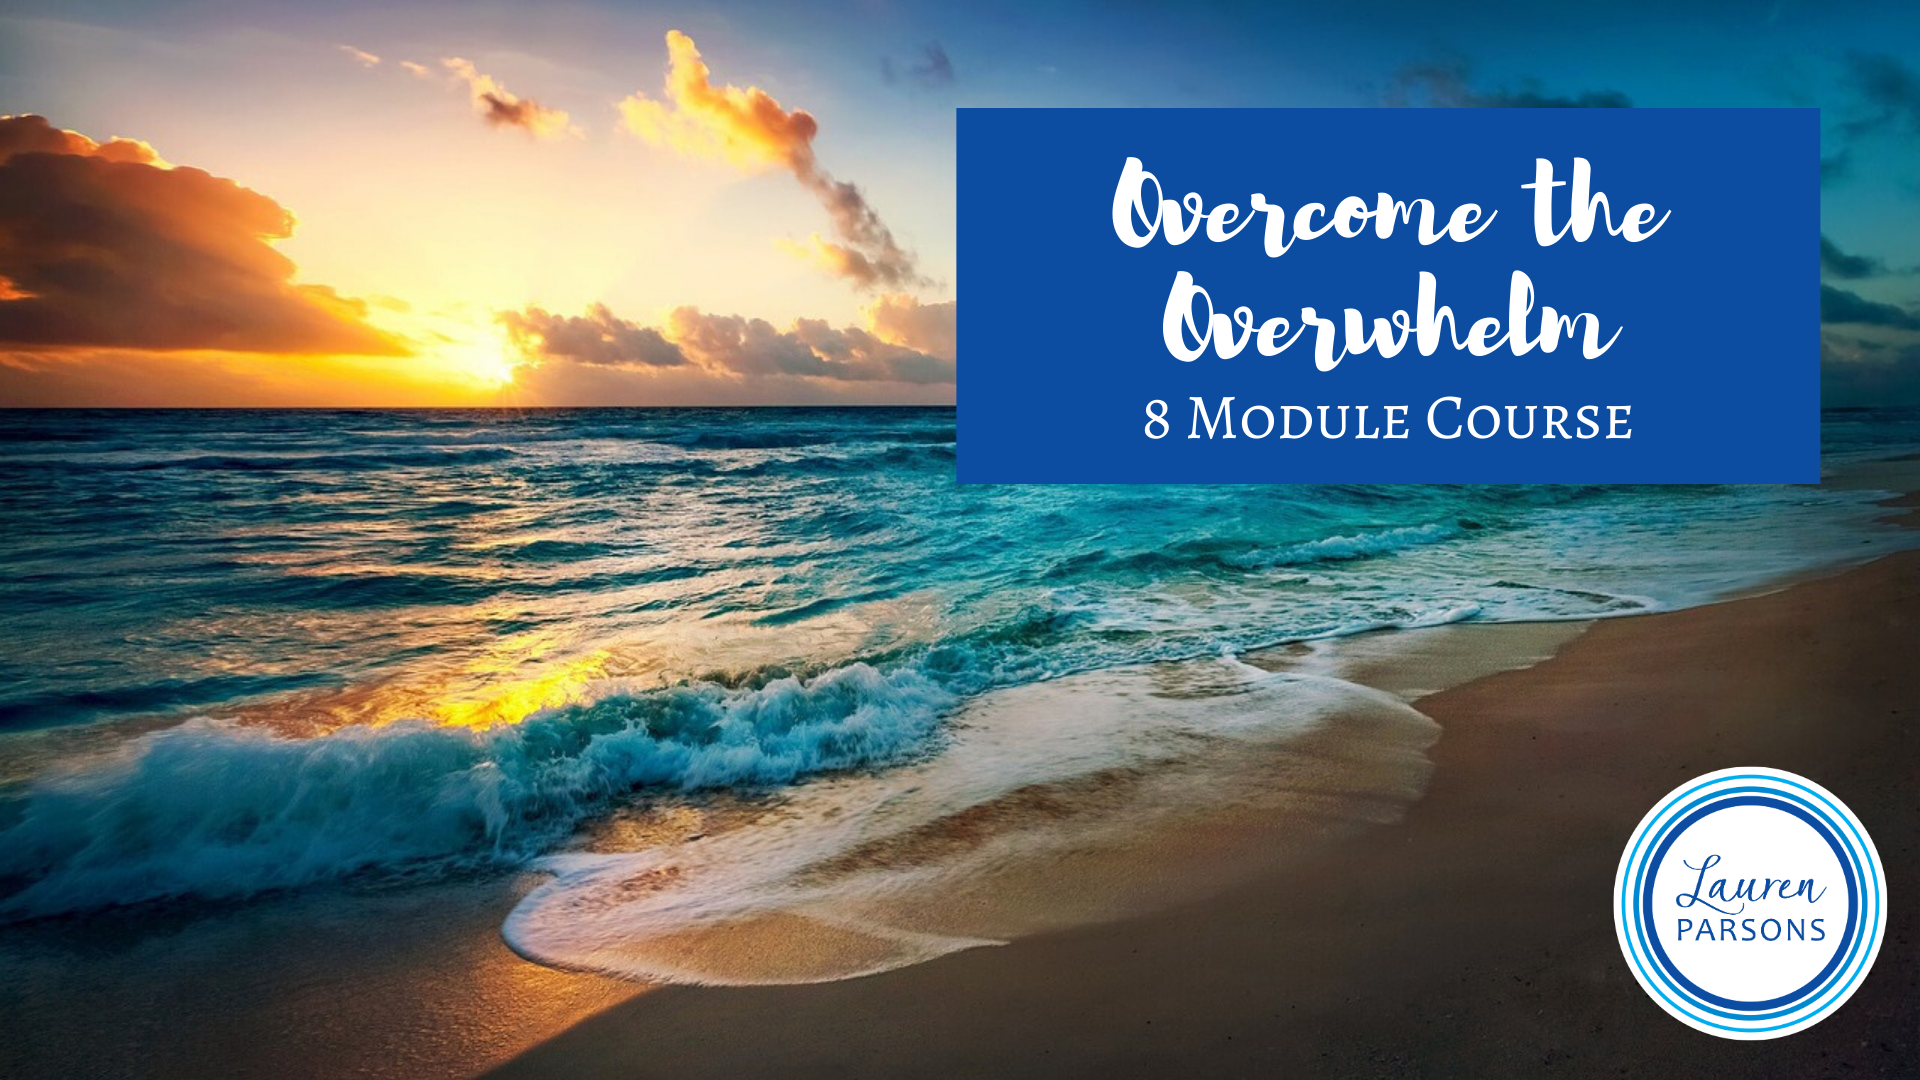 Lauren Parsons Workplace Wellbeing Training - Overcome the Overwhelm